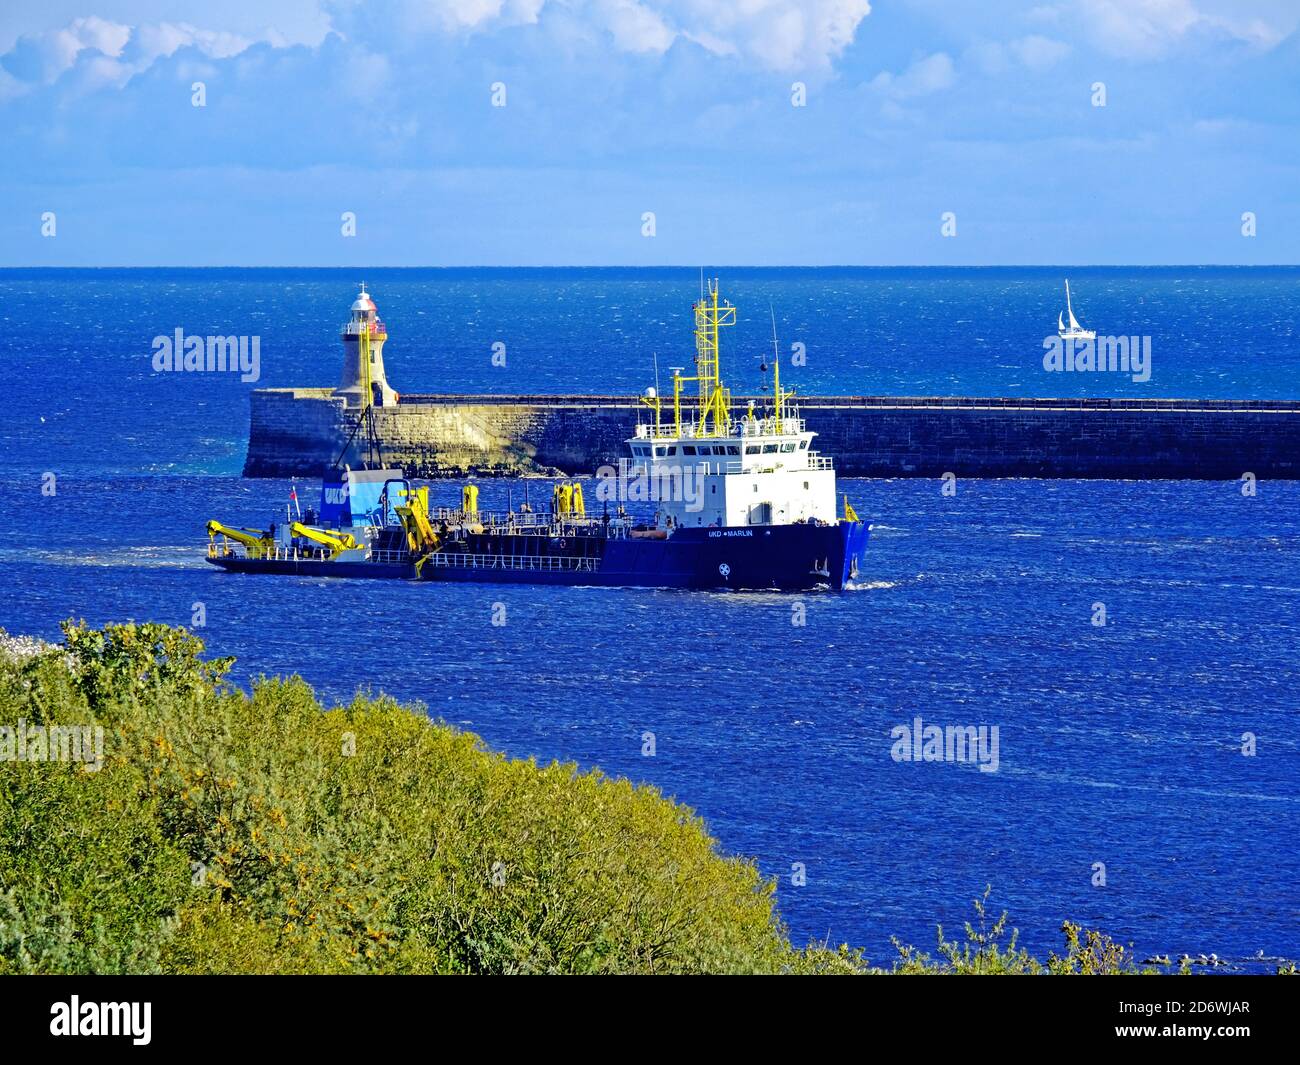 UKD Marlin dredging a channel in the mouth of the river Tyne with blue sky and sailing boat Stock Photo